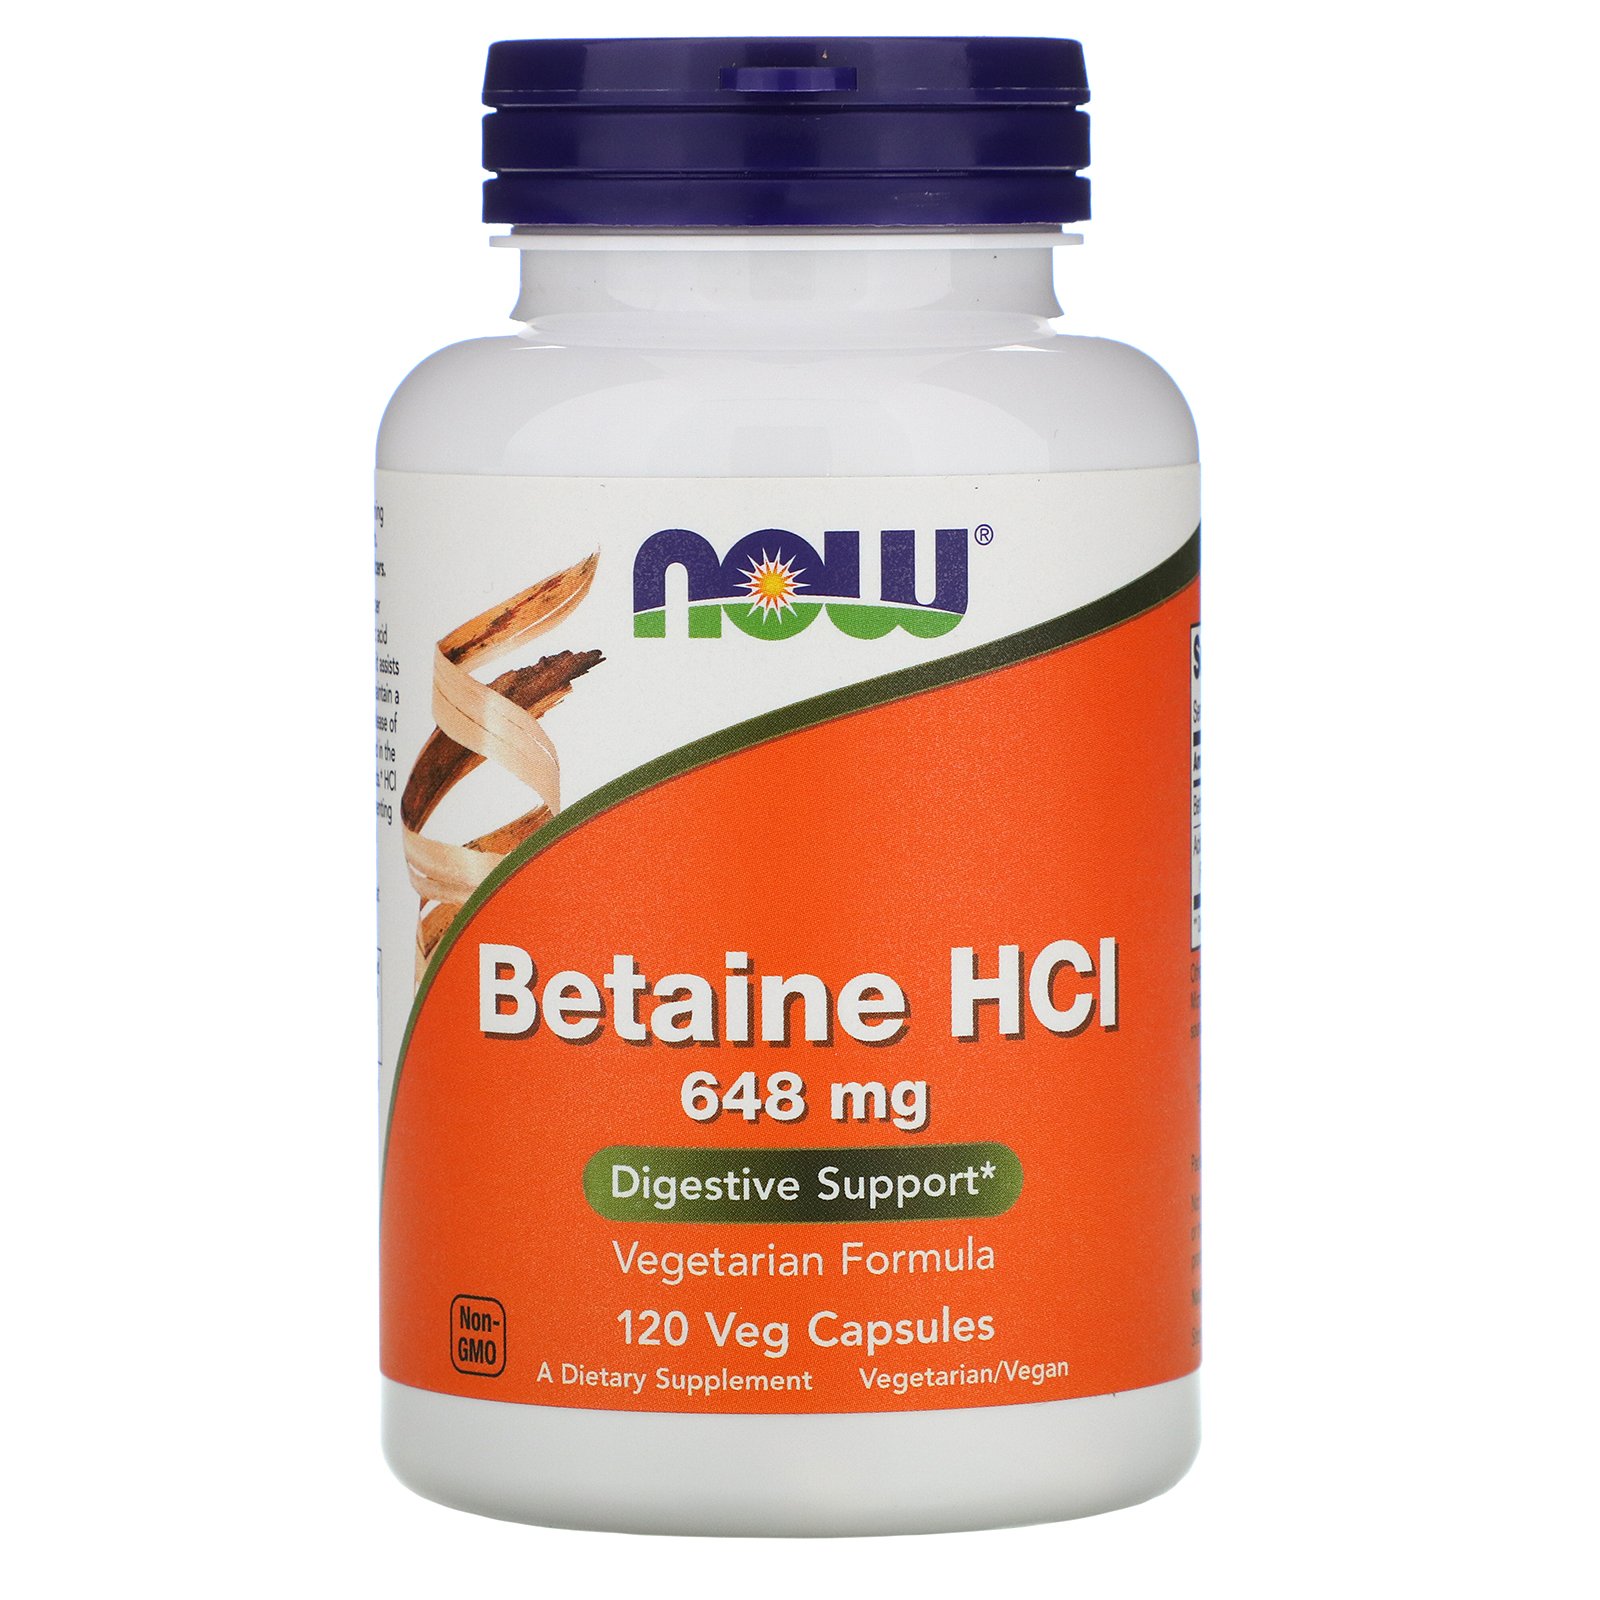 Betaine HCl 648 mg - 120 Veg Capsules